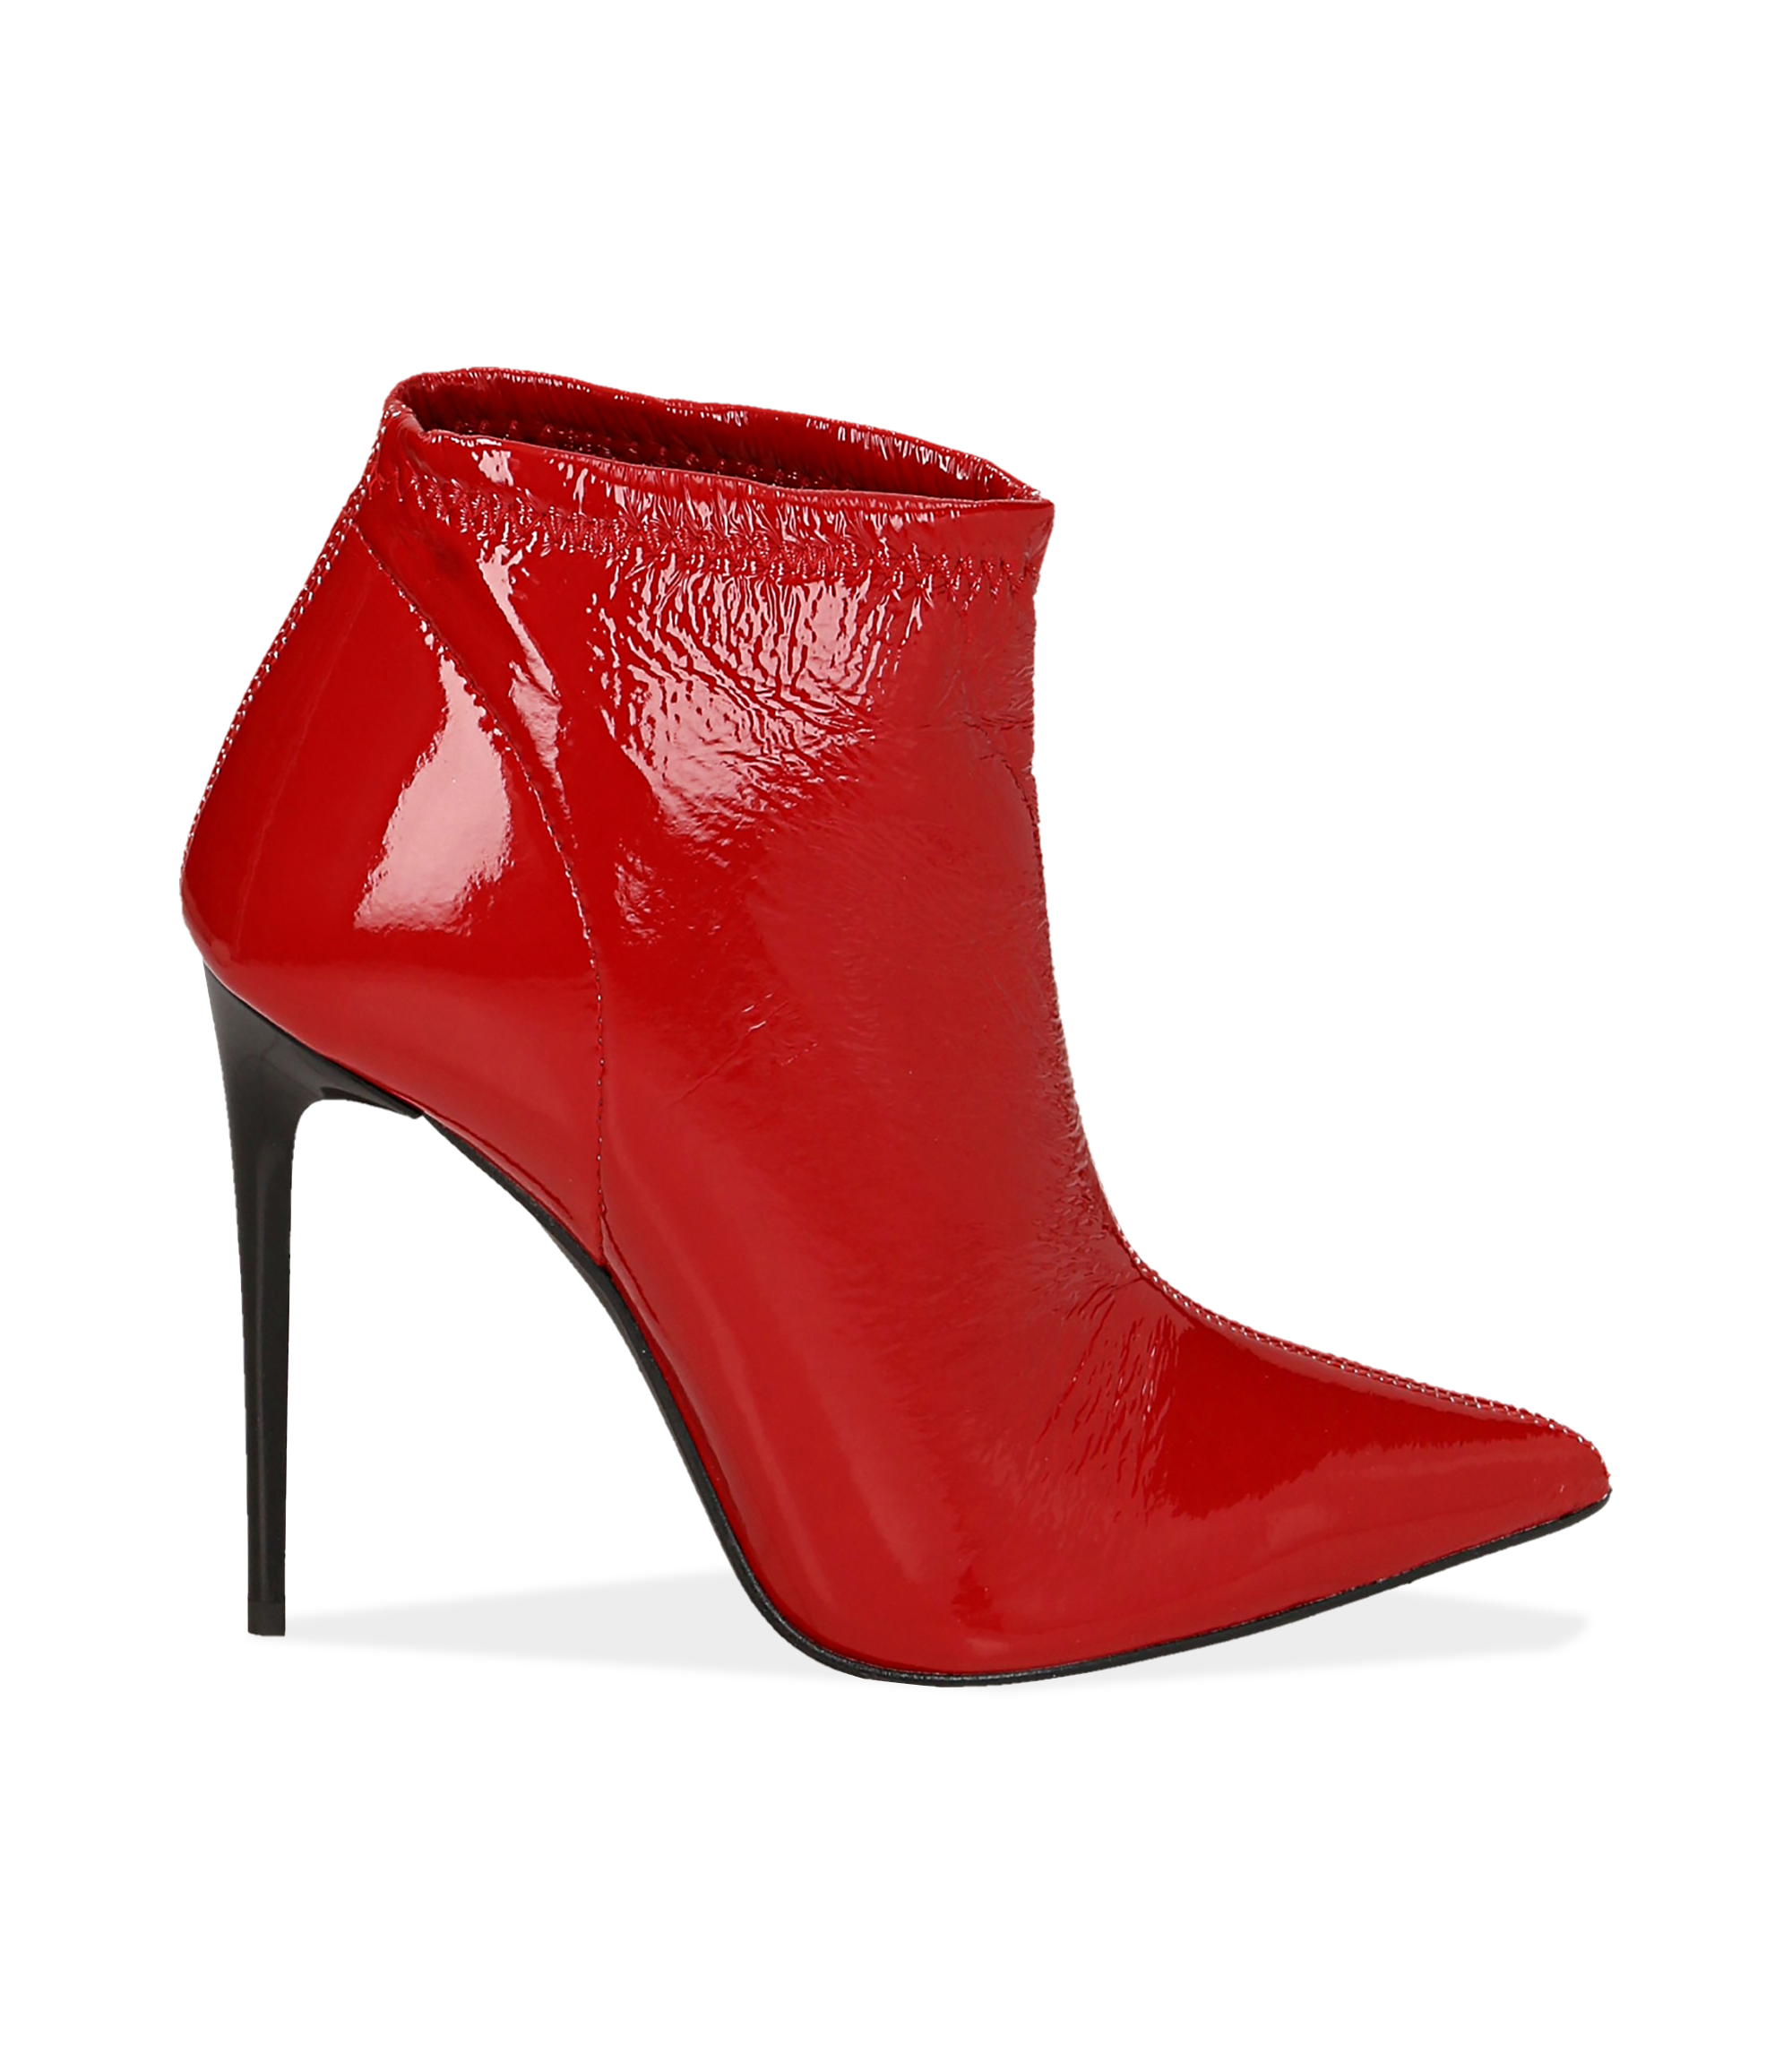 Ankle boots rossi in naplak